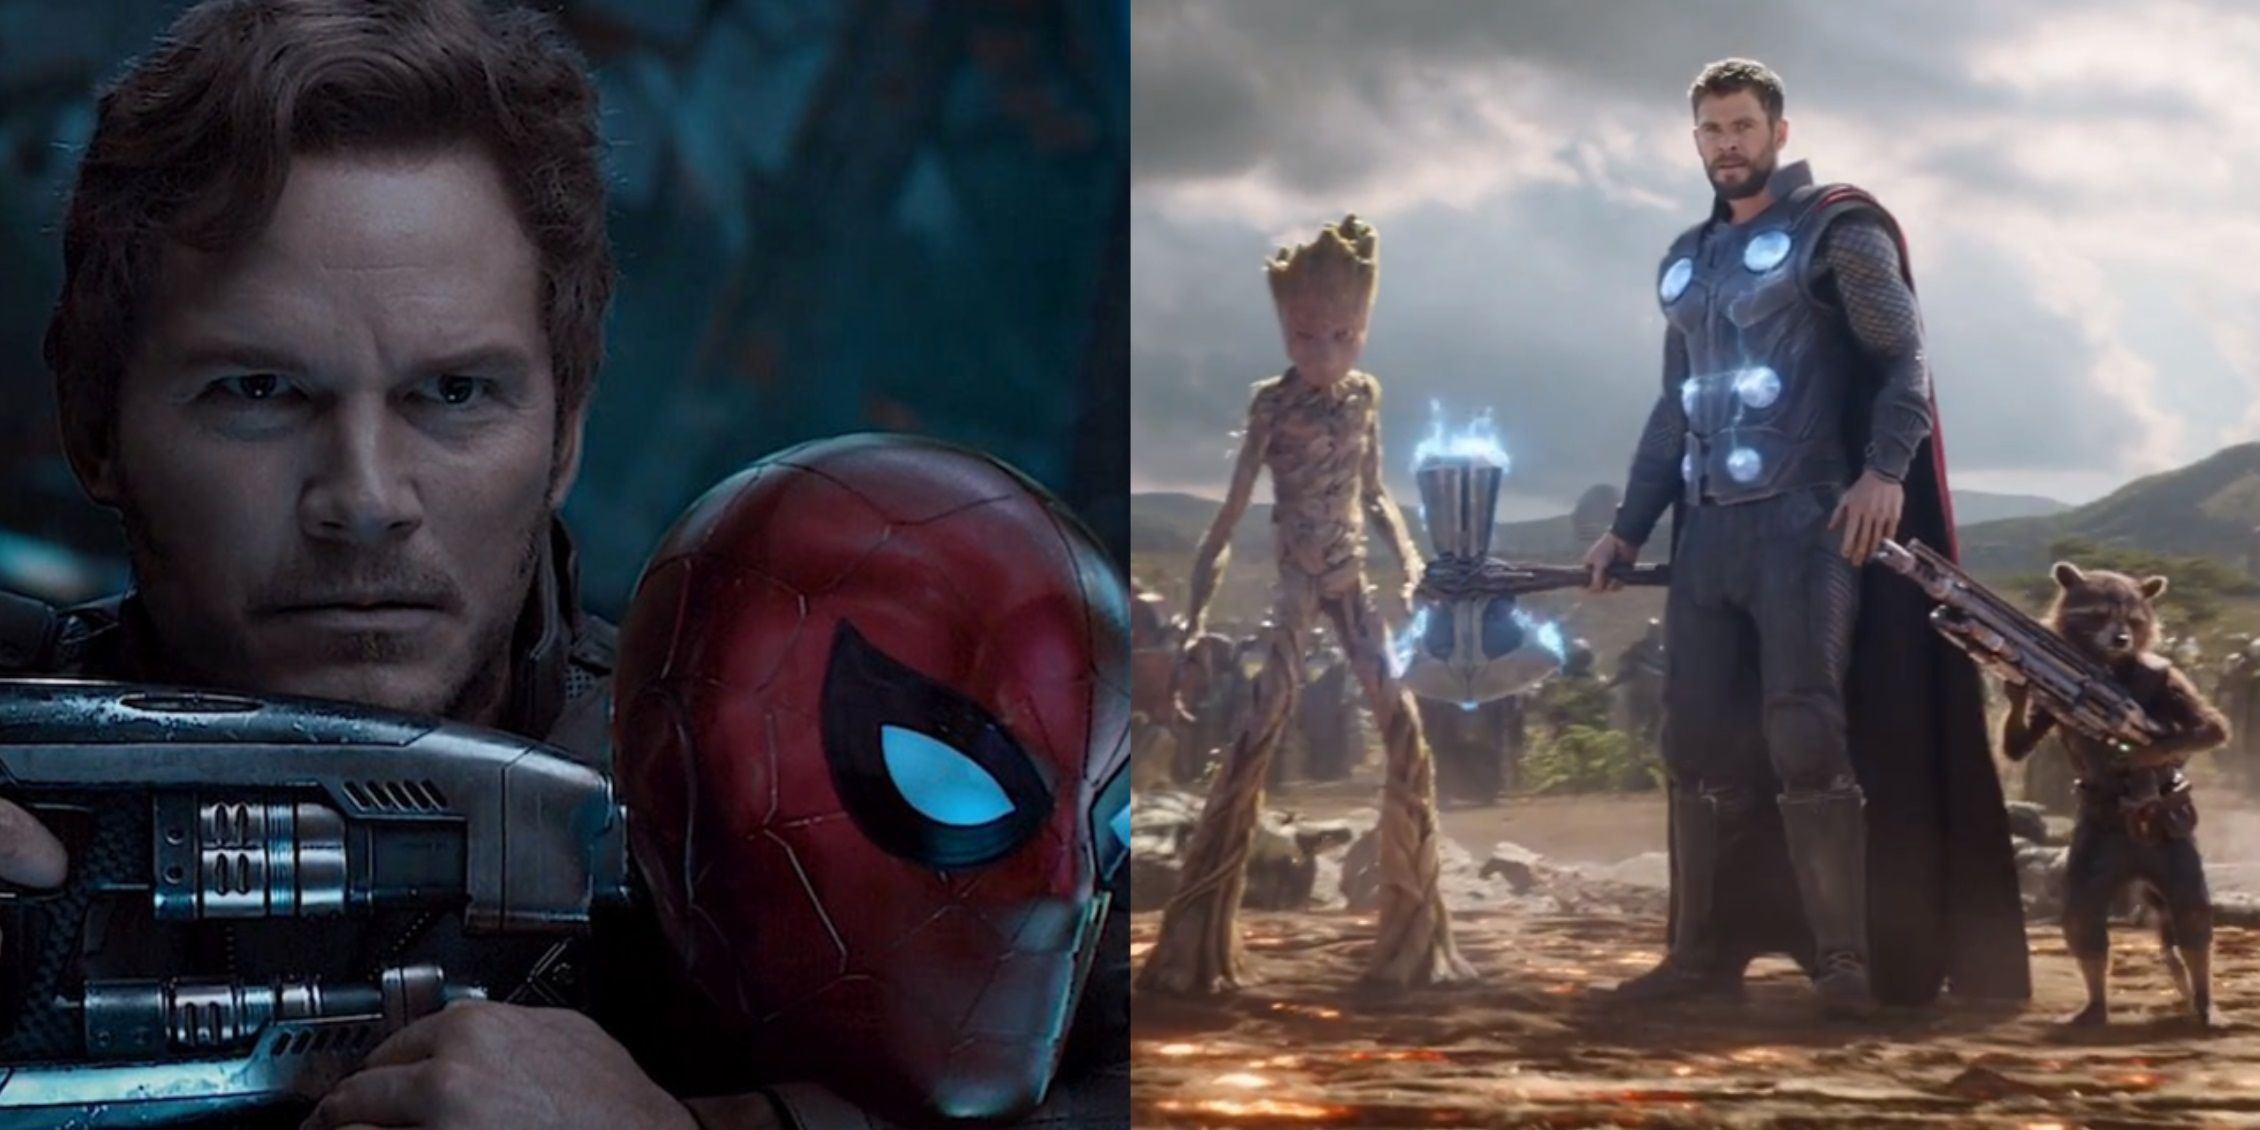 Split image of Star-Lord holding Spider-Man at gunpoint and Thor, Rocket, and Groot arriving in Wakanda in Avengers Infinity War